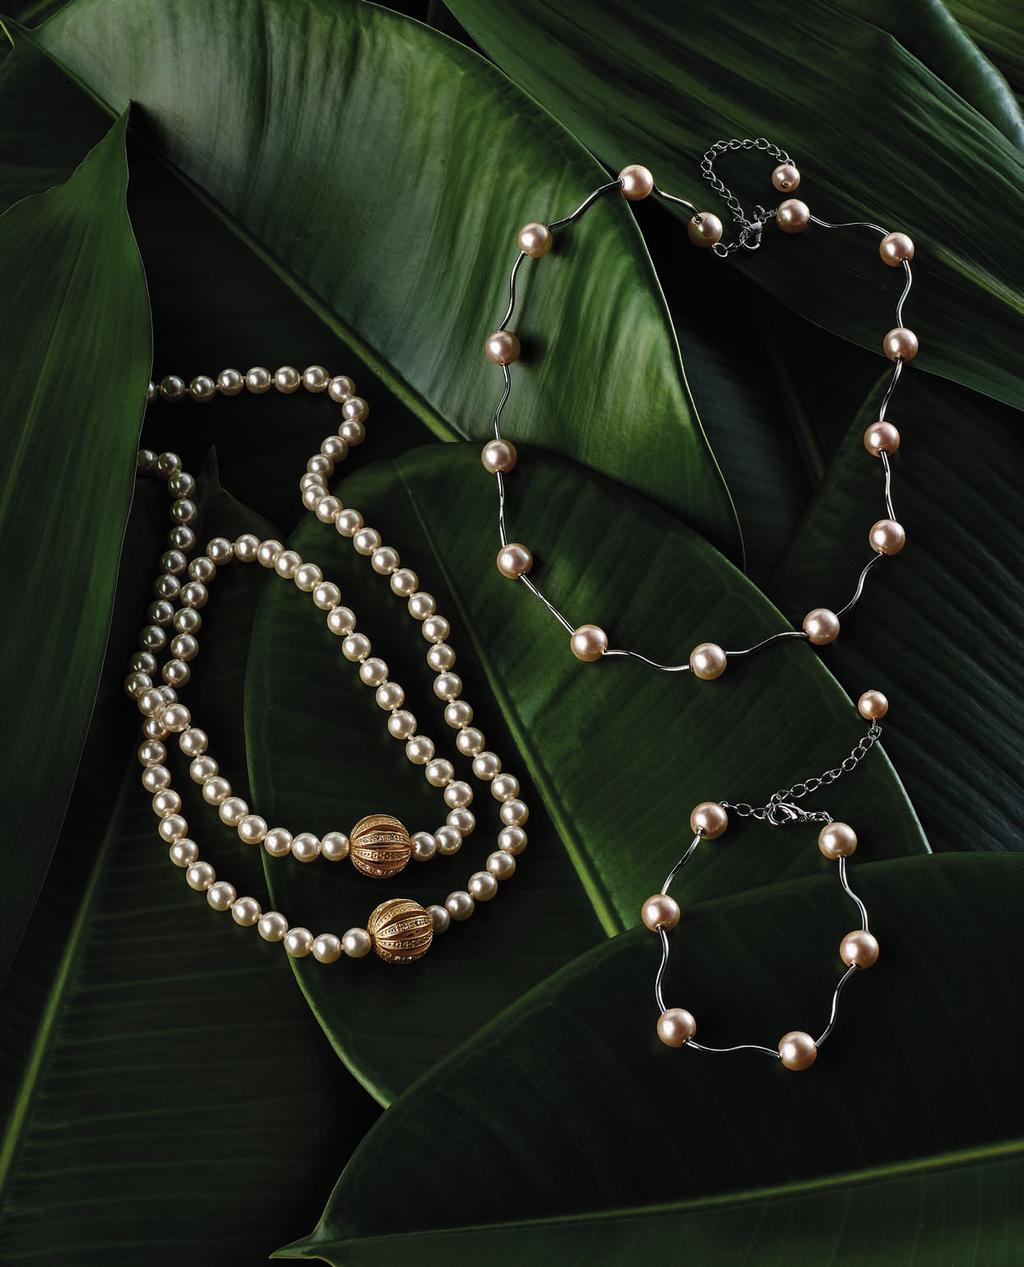 02 03 01 01 PEARL NECKLACE CODE: 2288 89,90 Extra-long necklace with individually knotted pearls, 8mm in diameter, it also features two large filigree bead stations, plated in yellow gold with satin